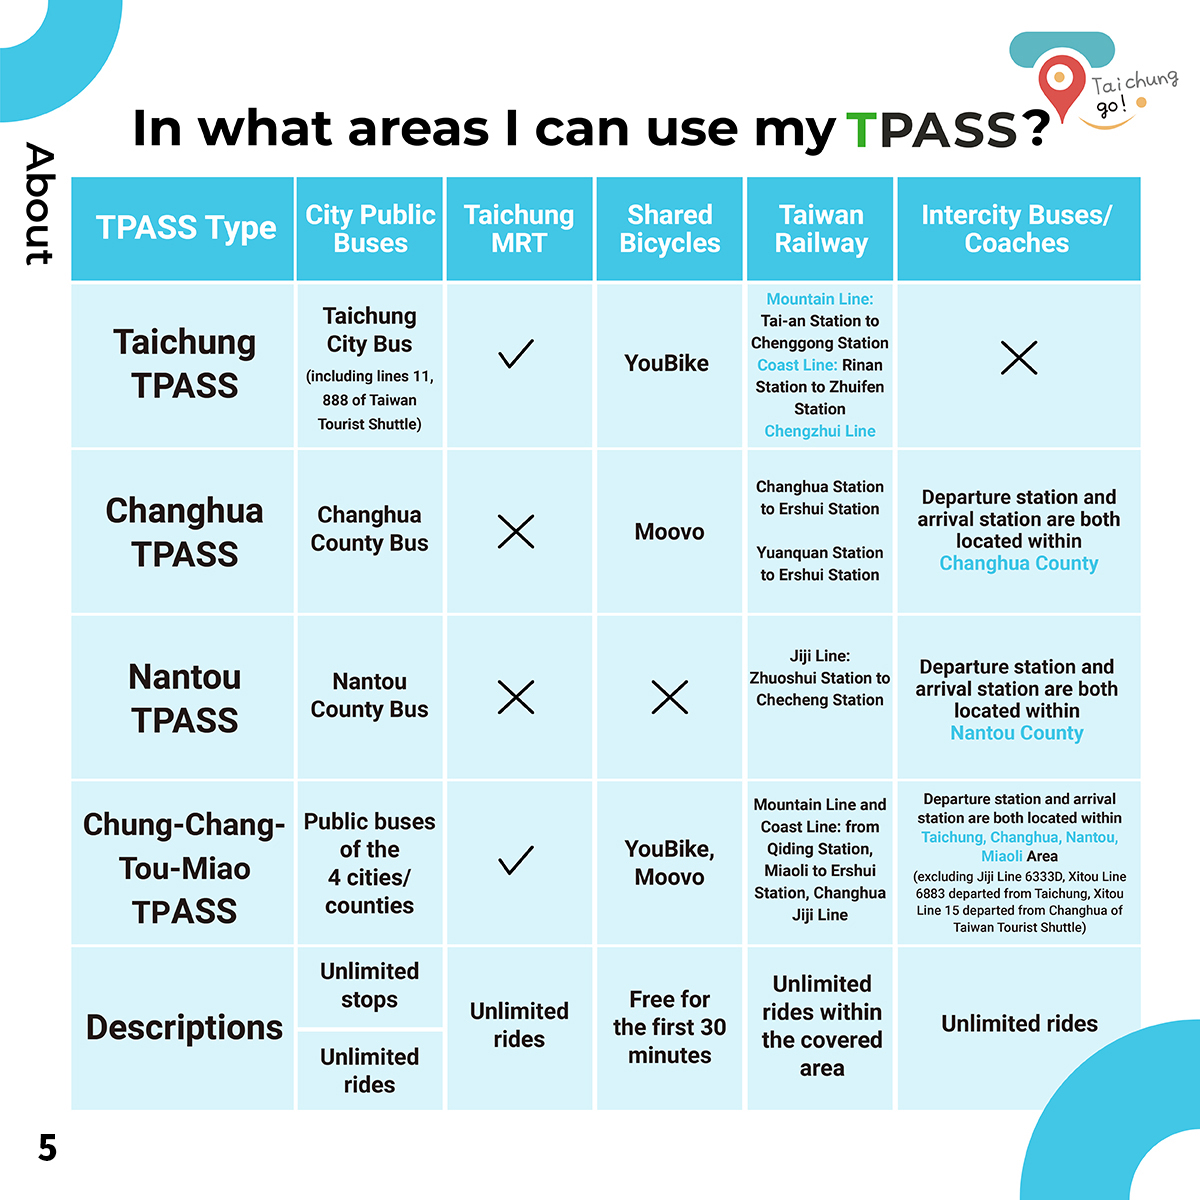 In what areas I can use my TPASS? You can go to destination by that contains City Public Bus,MRT,Bike,Train,Intercity Bus,Coaches.